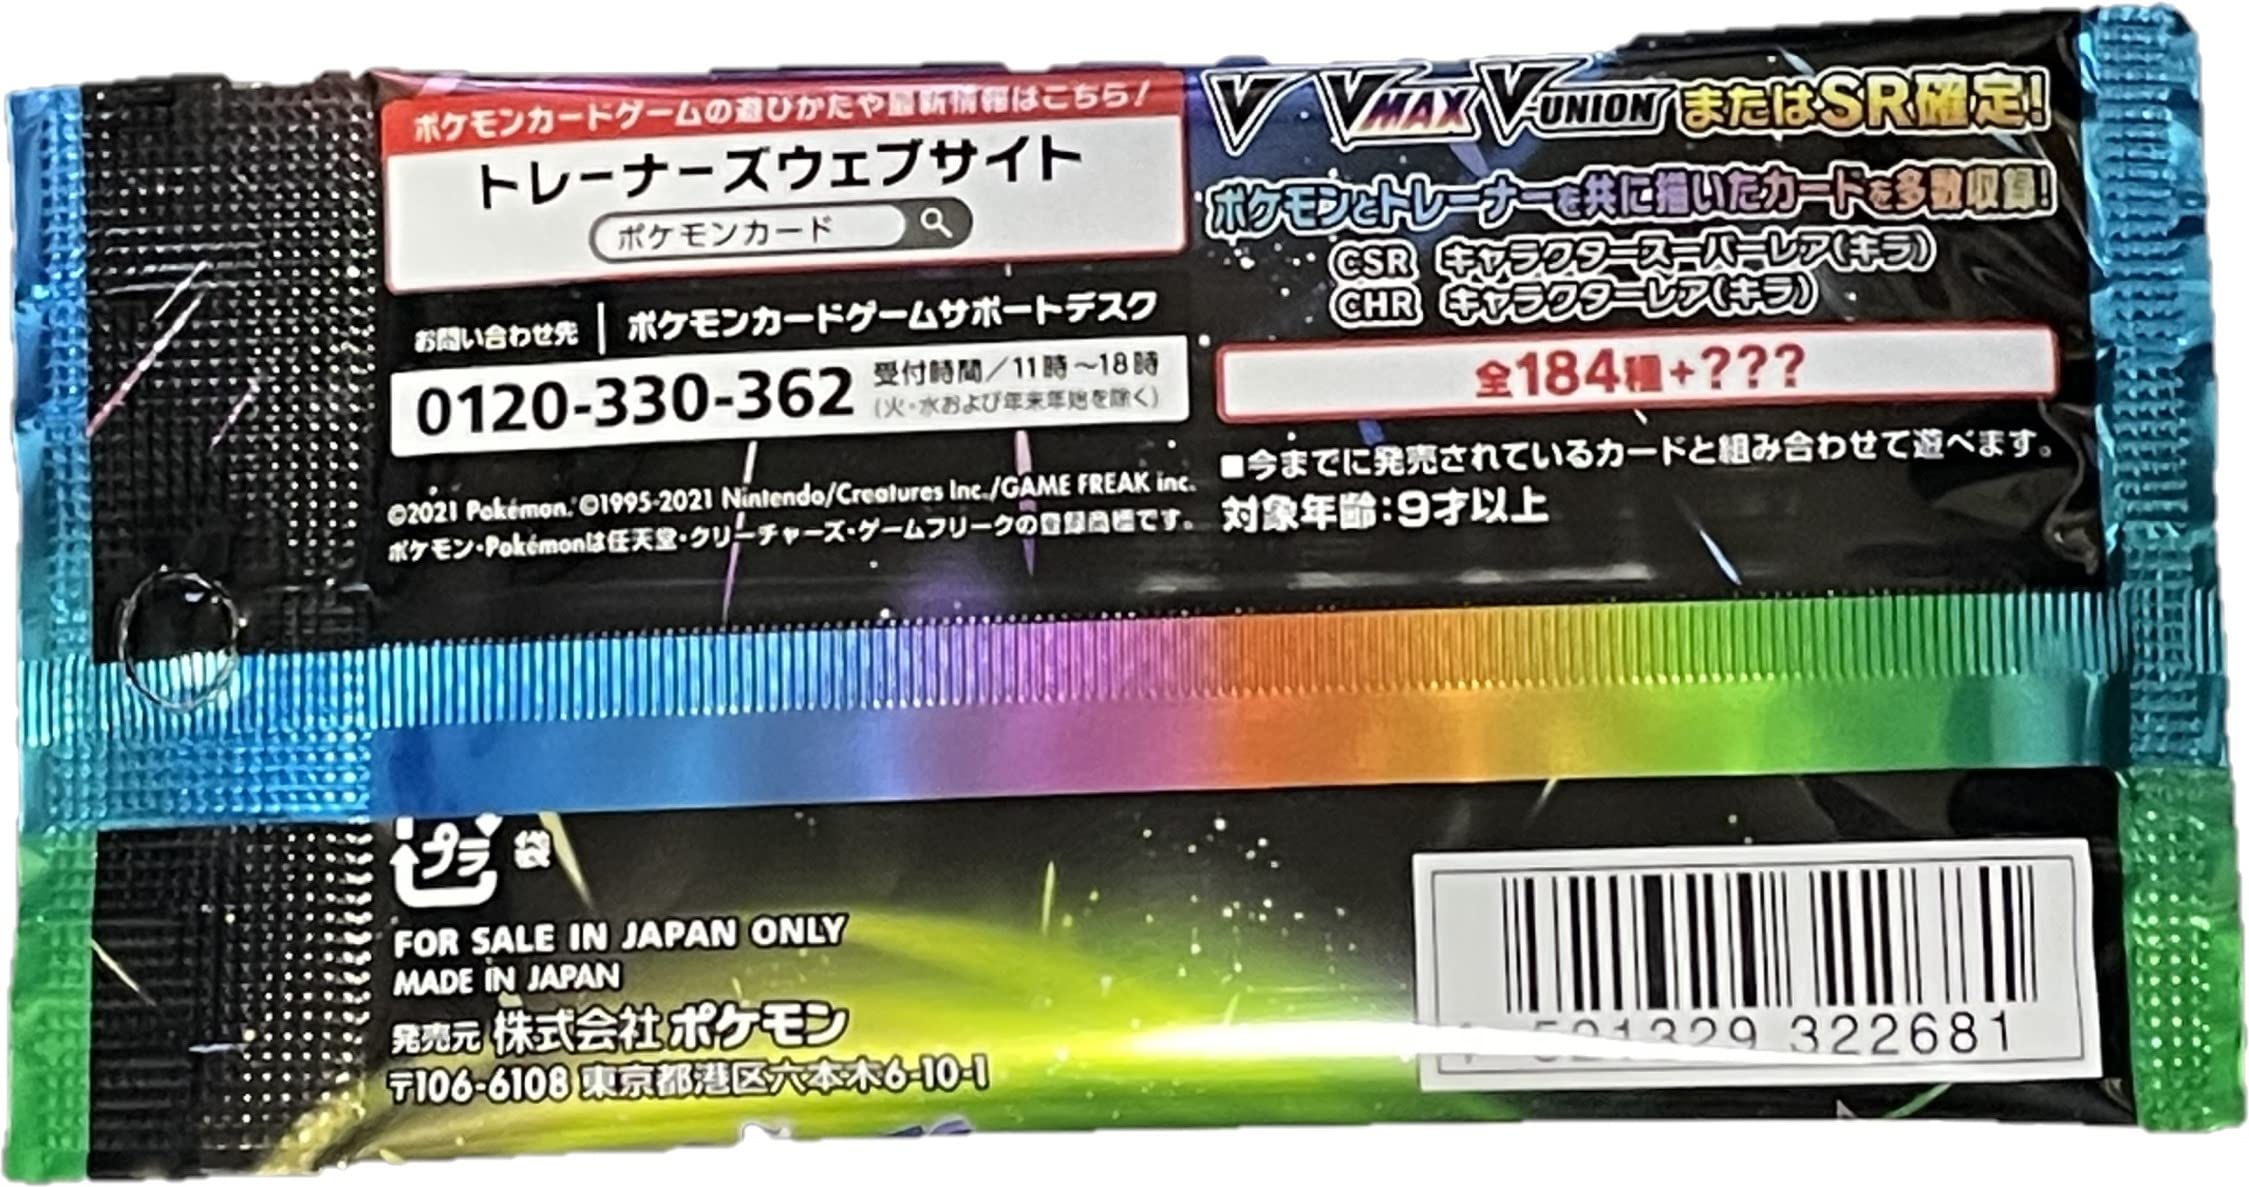 Pokemon (3packs) Card Game Sword & Shield High Class Pack VMAX Climax Japanese Ver. (3 x 11 Cards Included)